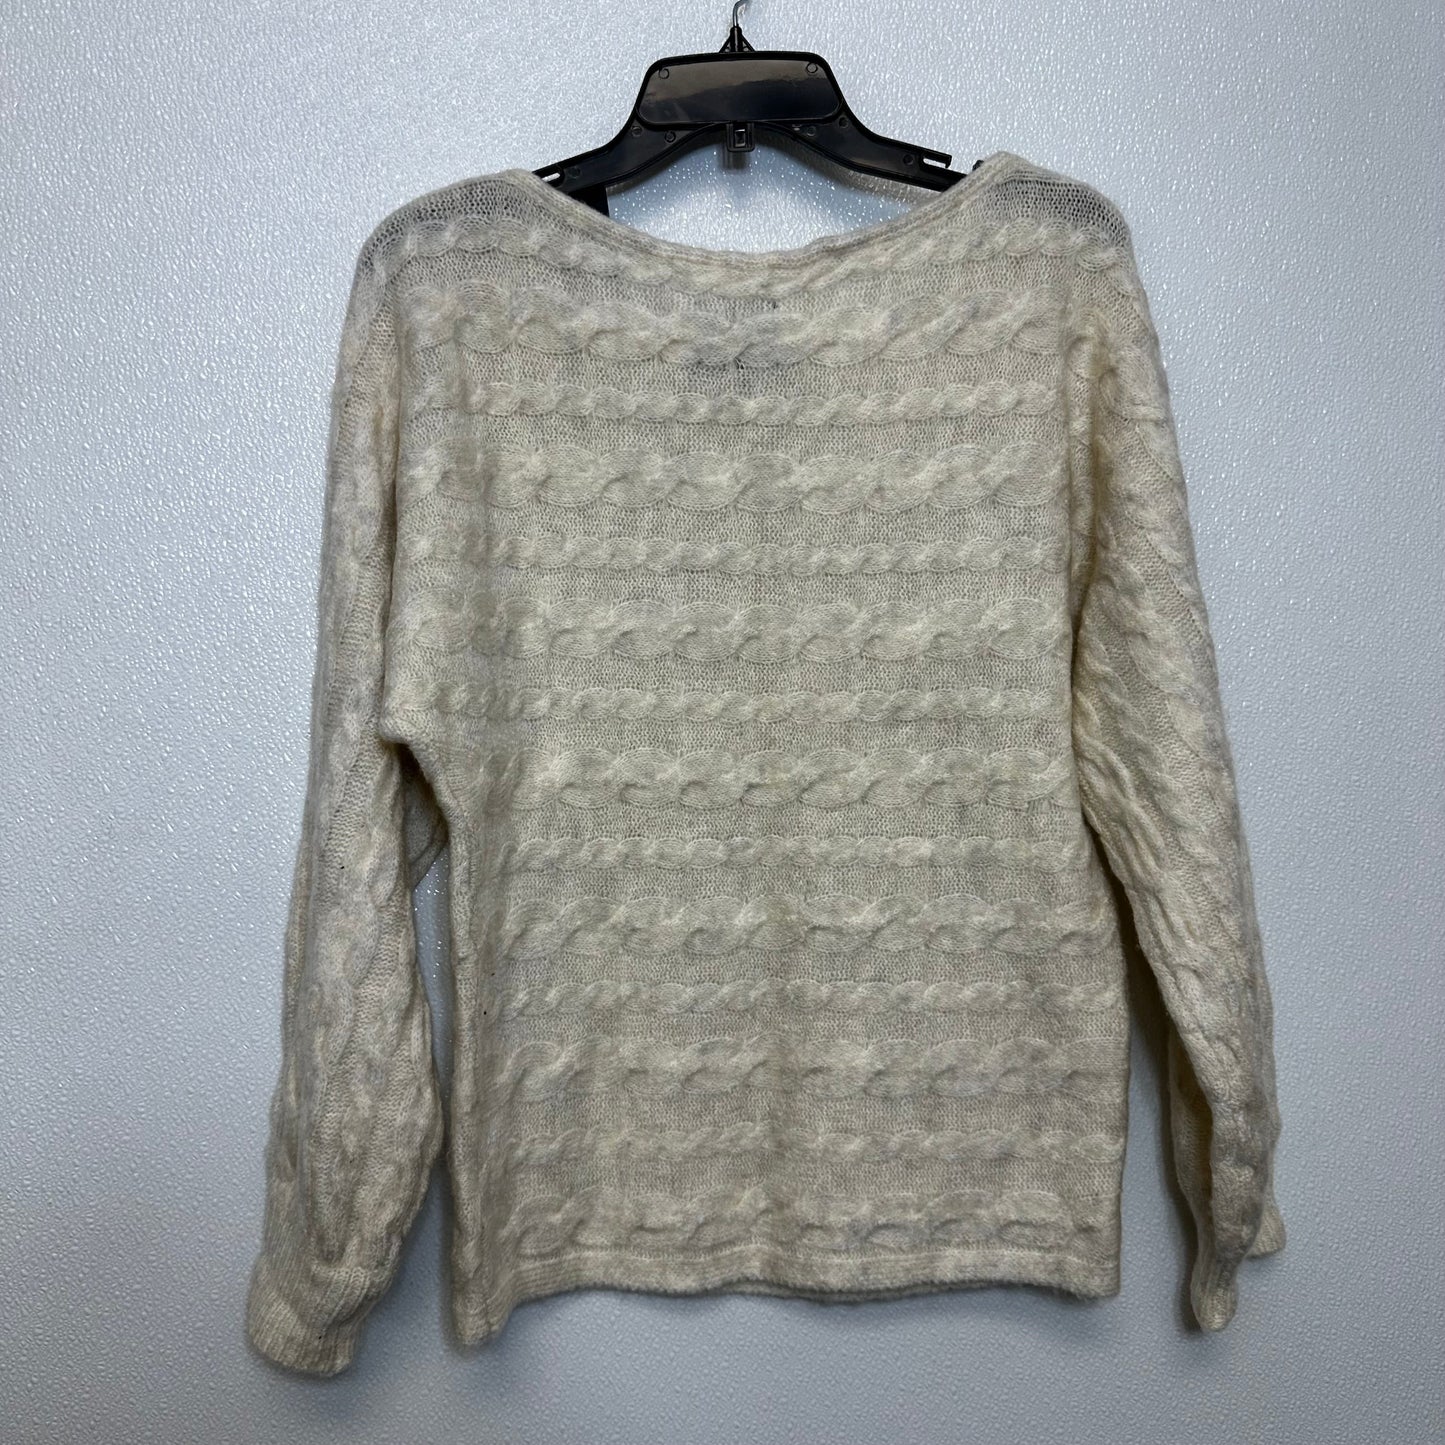 Off White Sweater Abercrombie And Fitch, Size M